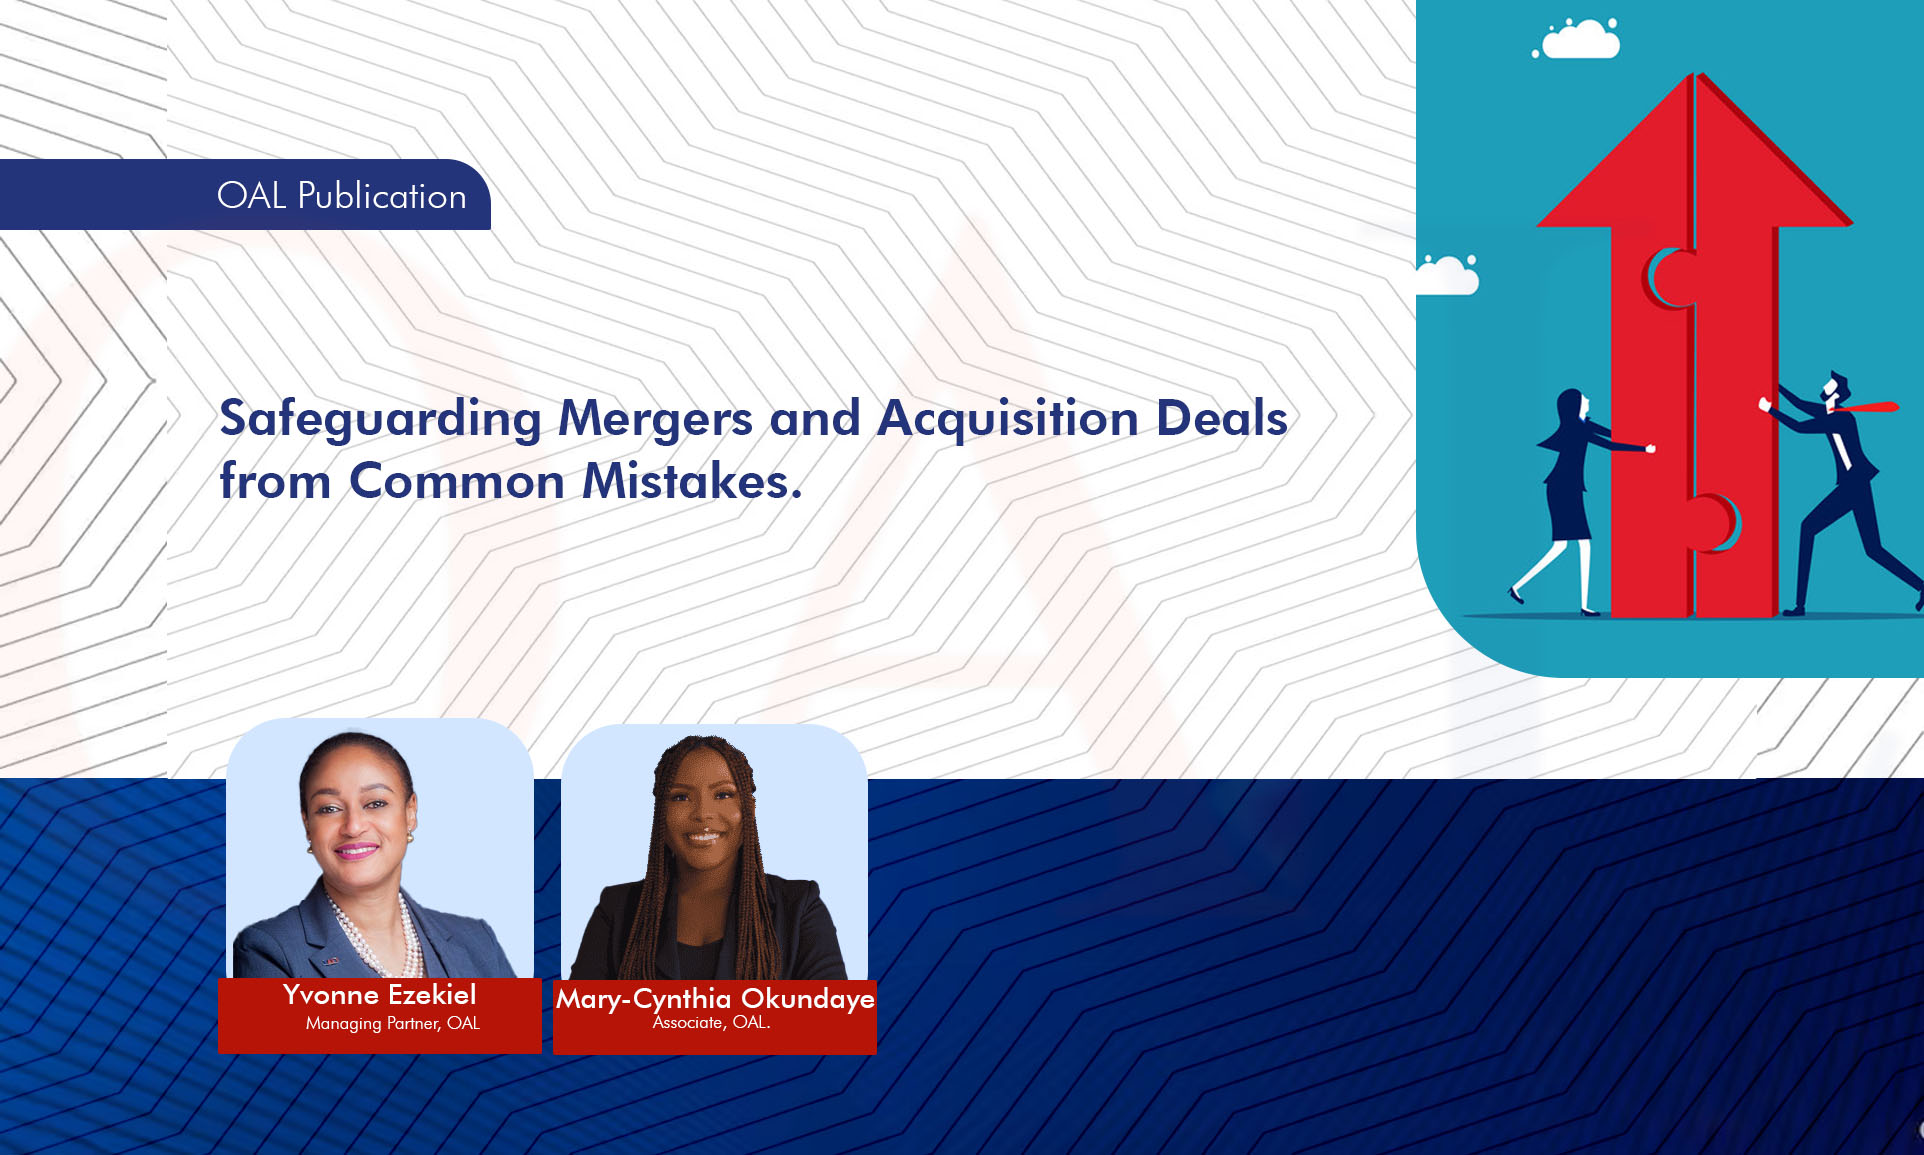 Safeguarding Mergers and Acquisition Deals from Common Mistakes - Olisa Agbakoba Legal (OAL)